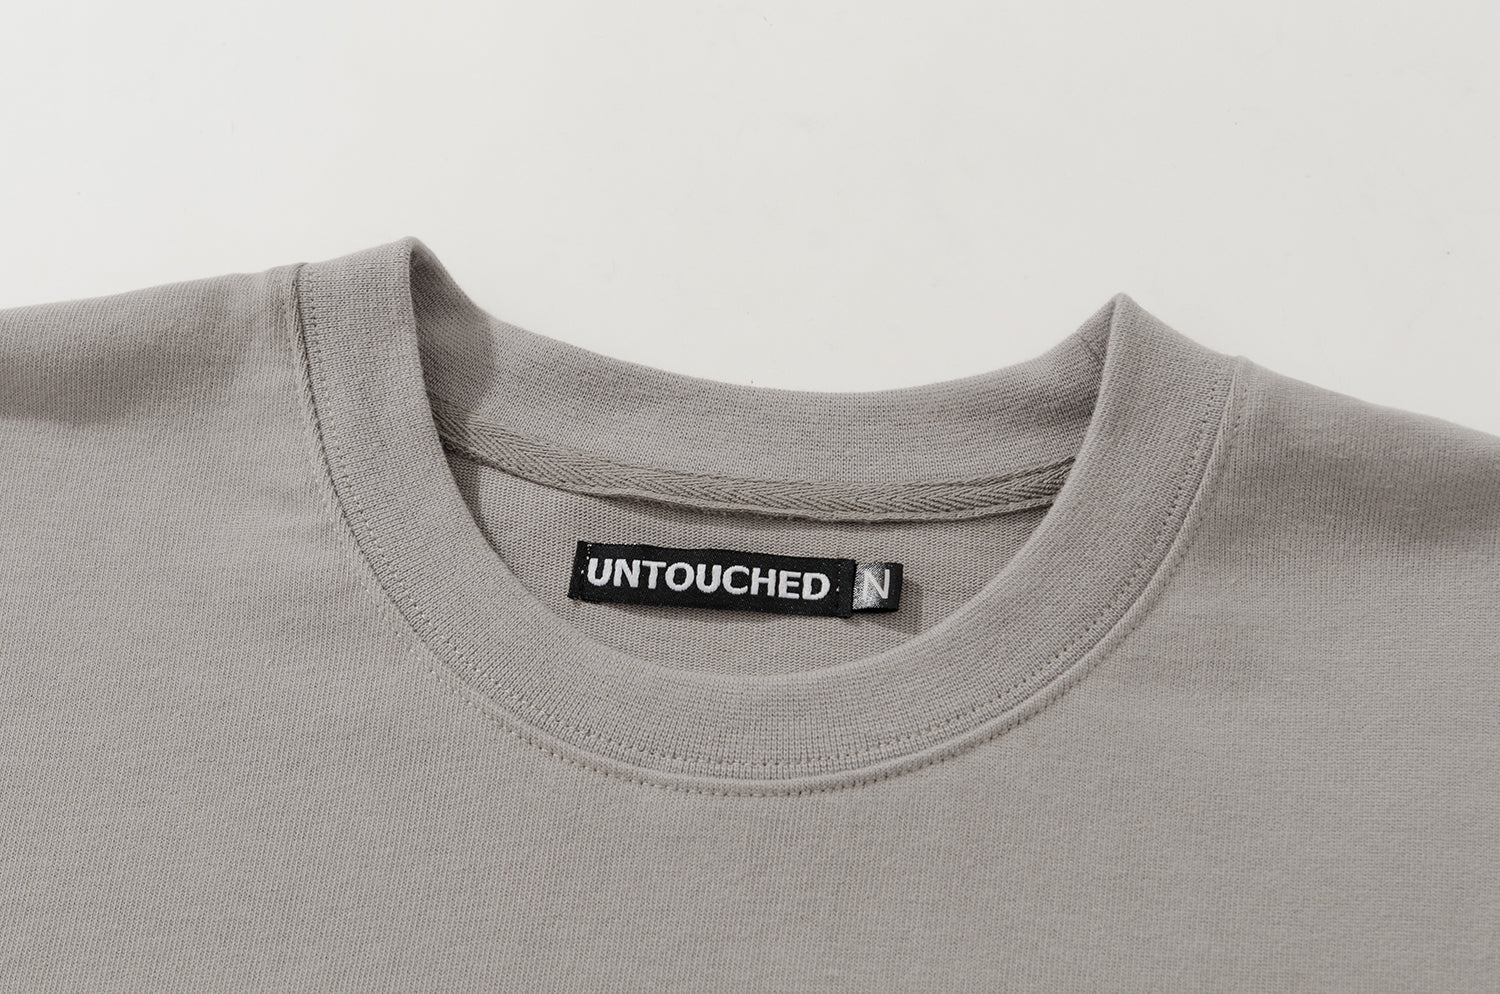 NW219LG | ABCDEFUCKOFF LIGHT GREY TEE | NOT WORKING V